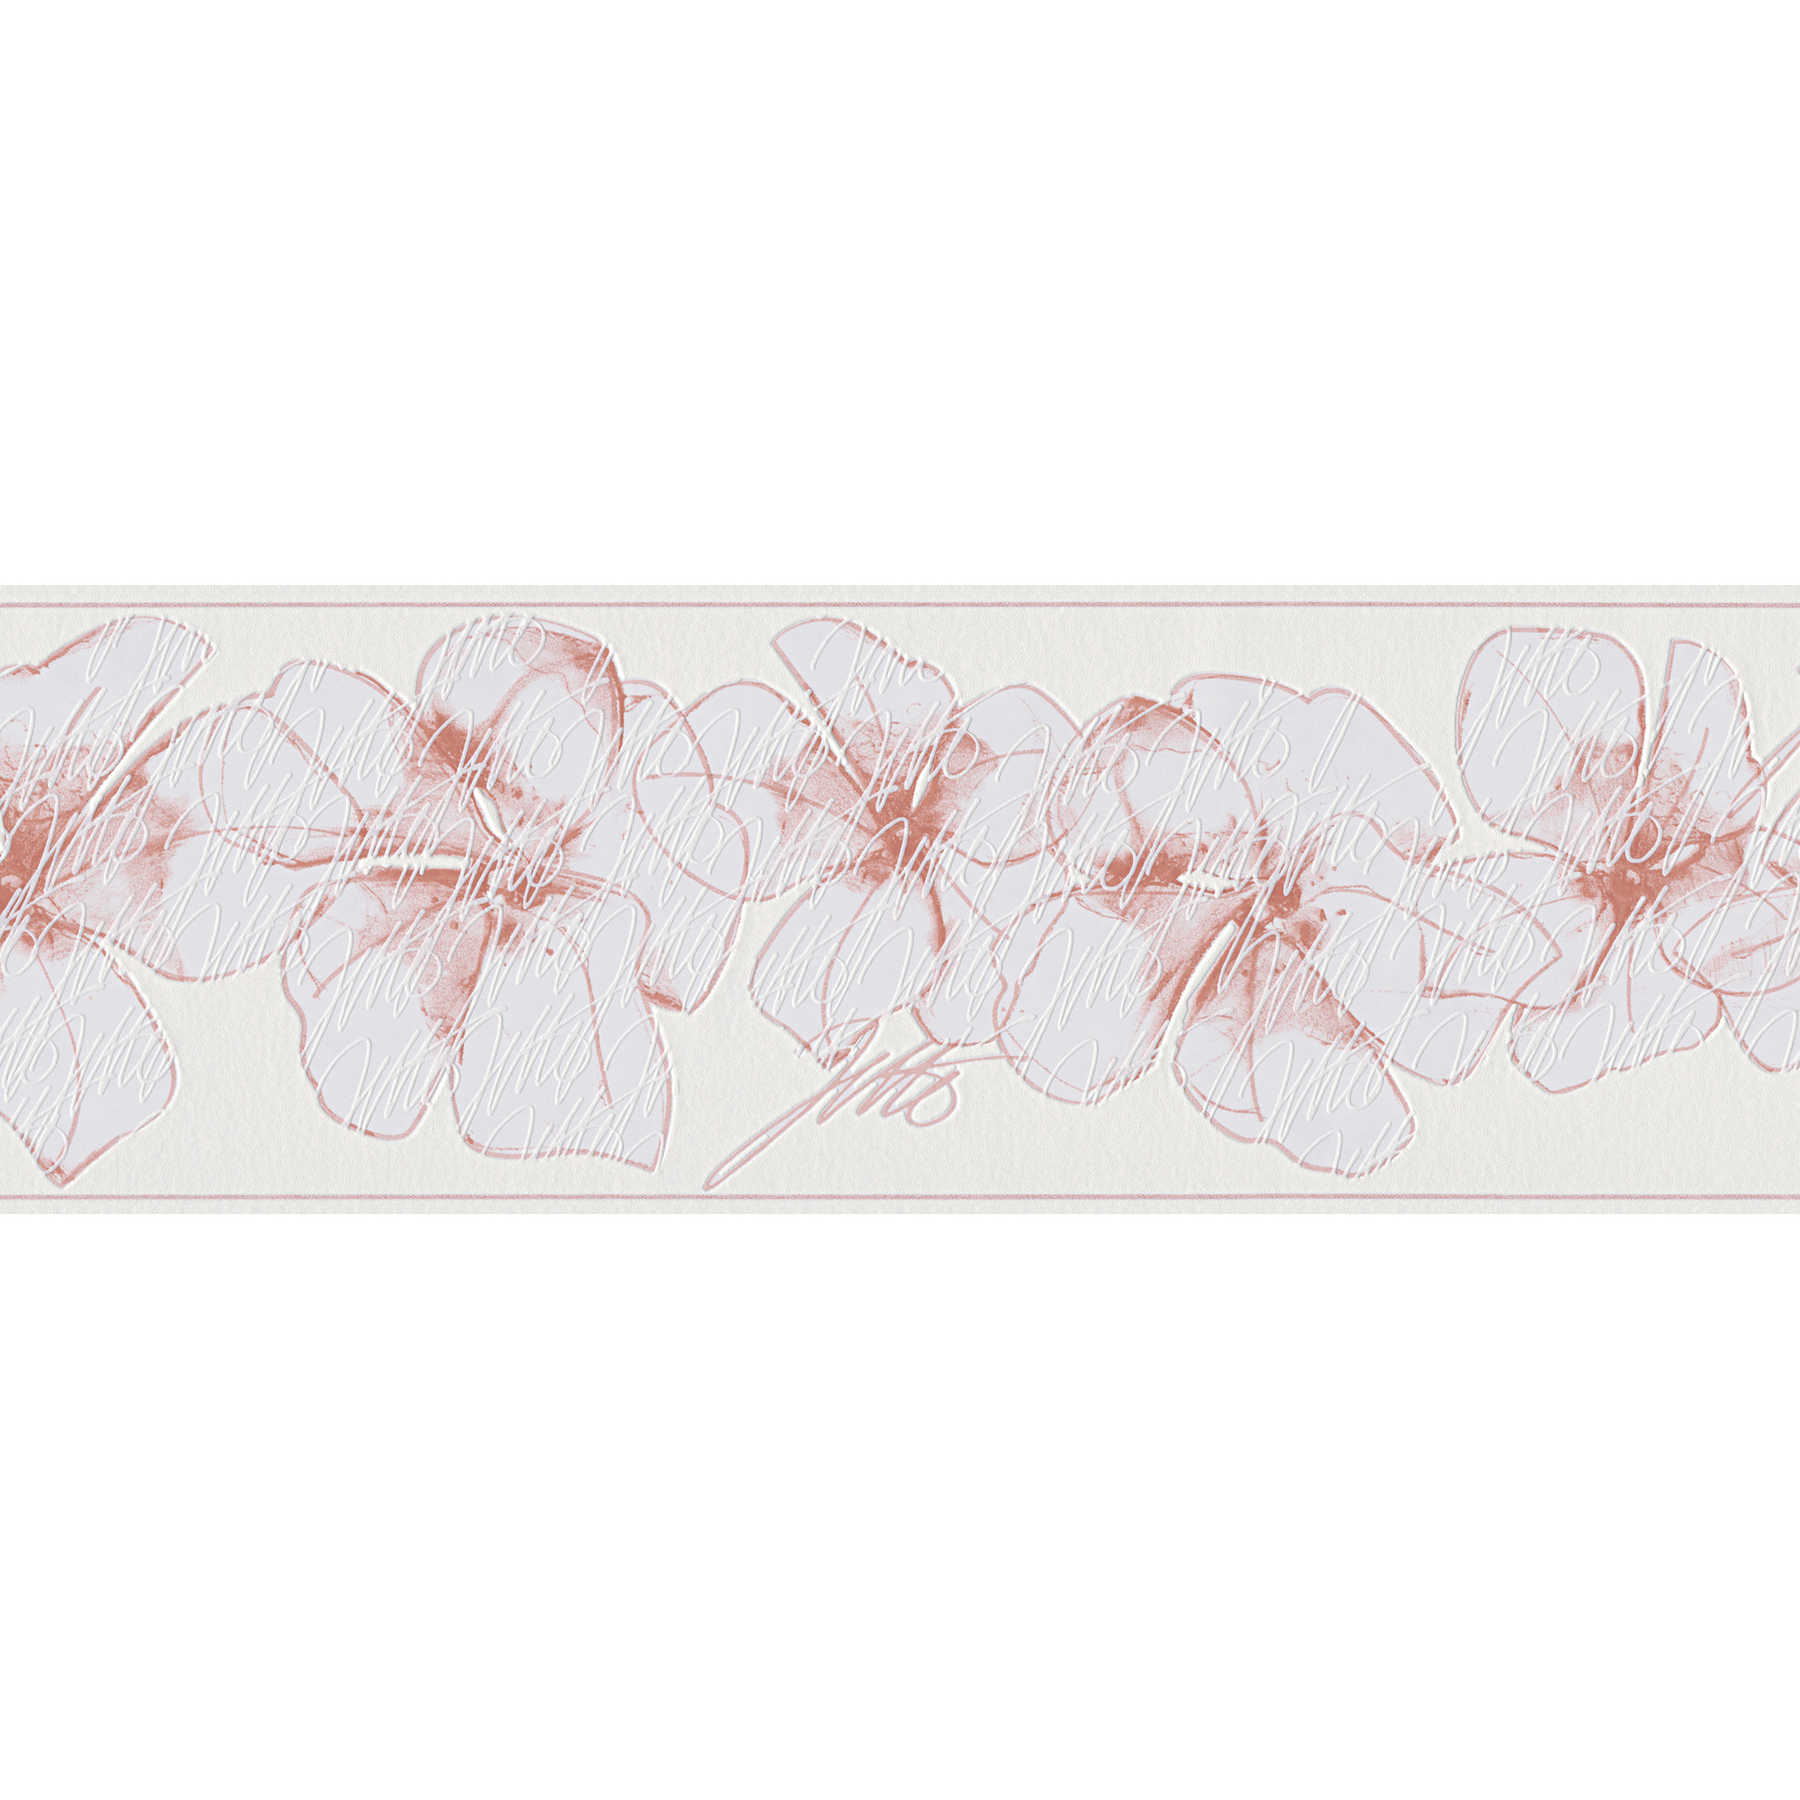         Wallpaper border with floral pattern - pink, white
    